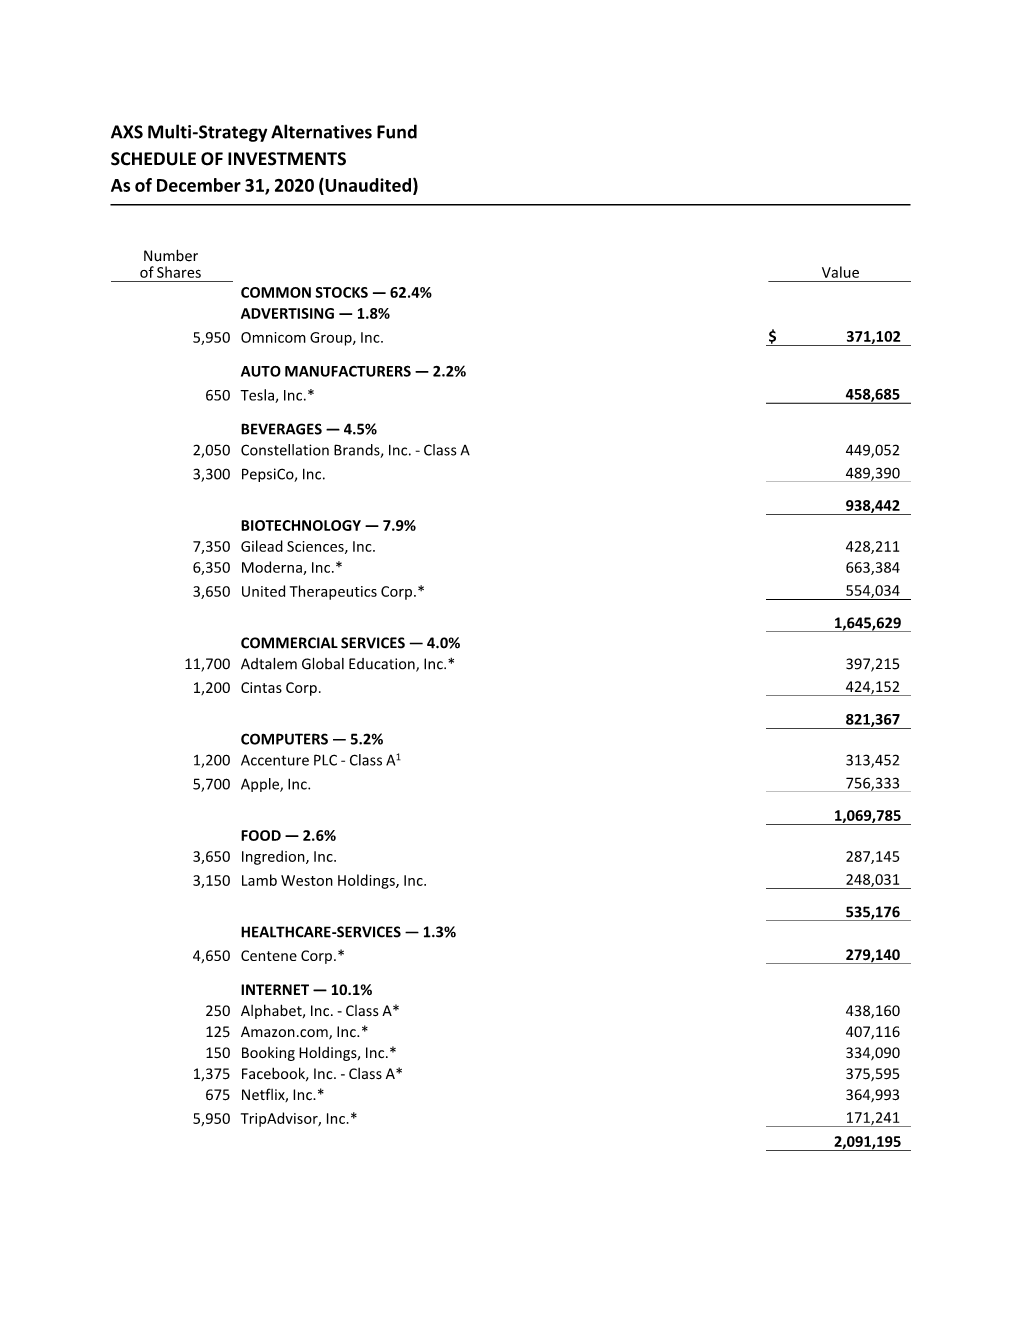 AXS Multi-Strategy Alternatives Fund SCHEDULE of INVESTMENTS As